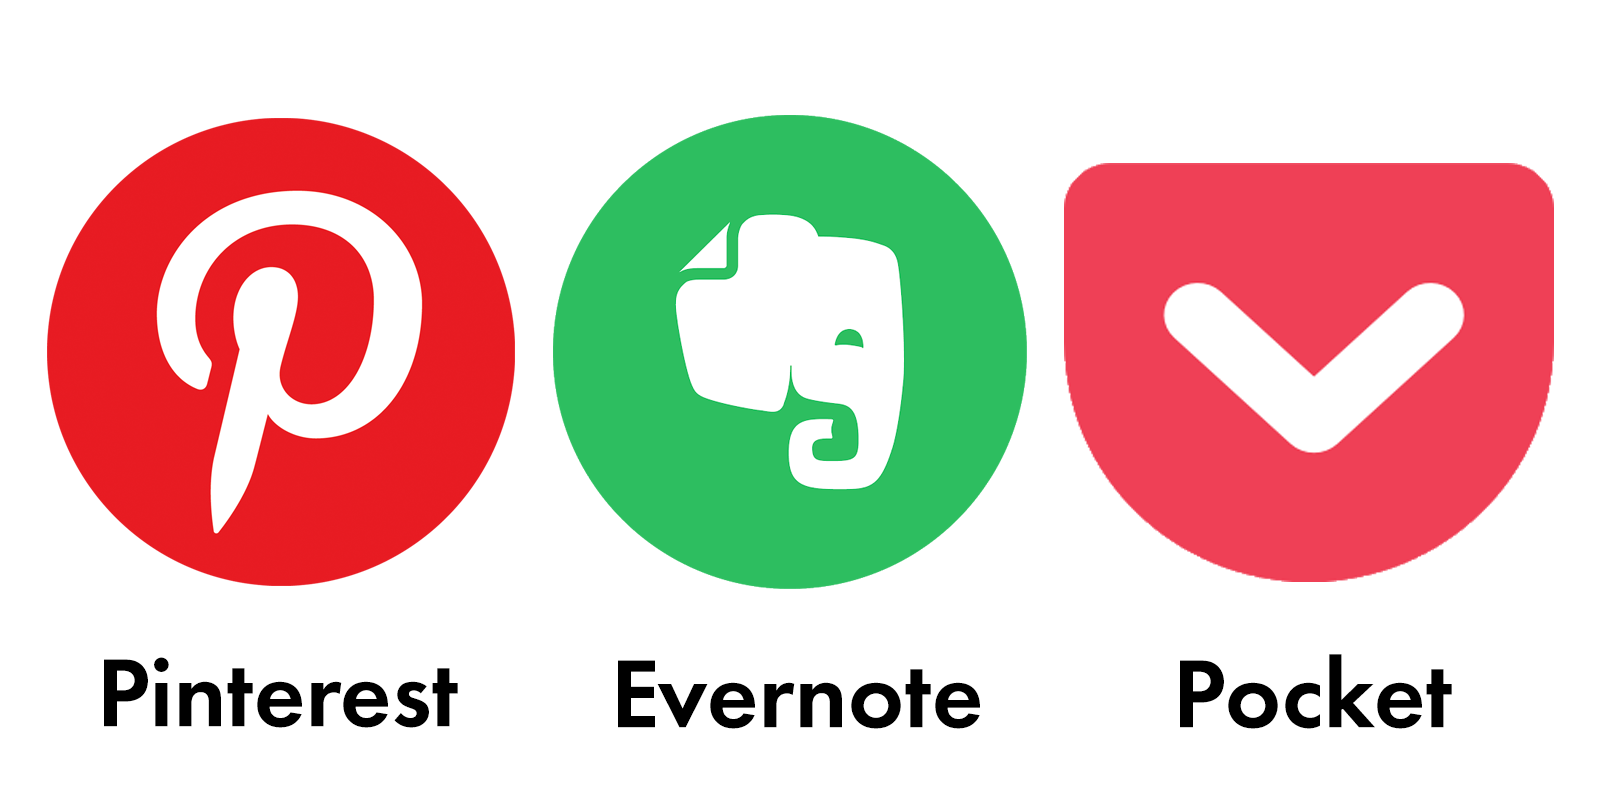 Pinterest, Evernote, Pocket, Insightful Messages are helpful for saving future email marketing campaigns